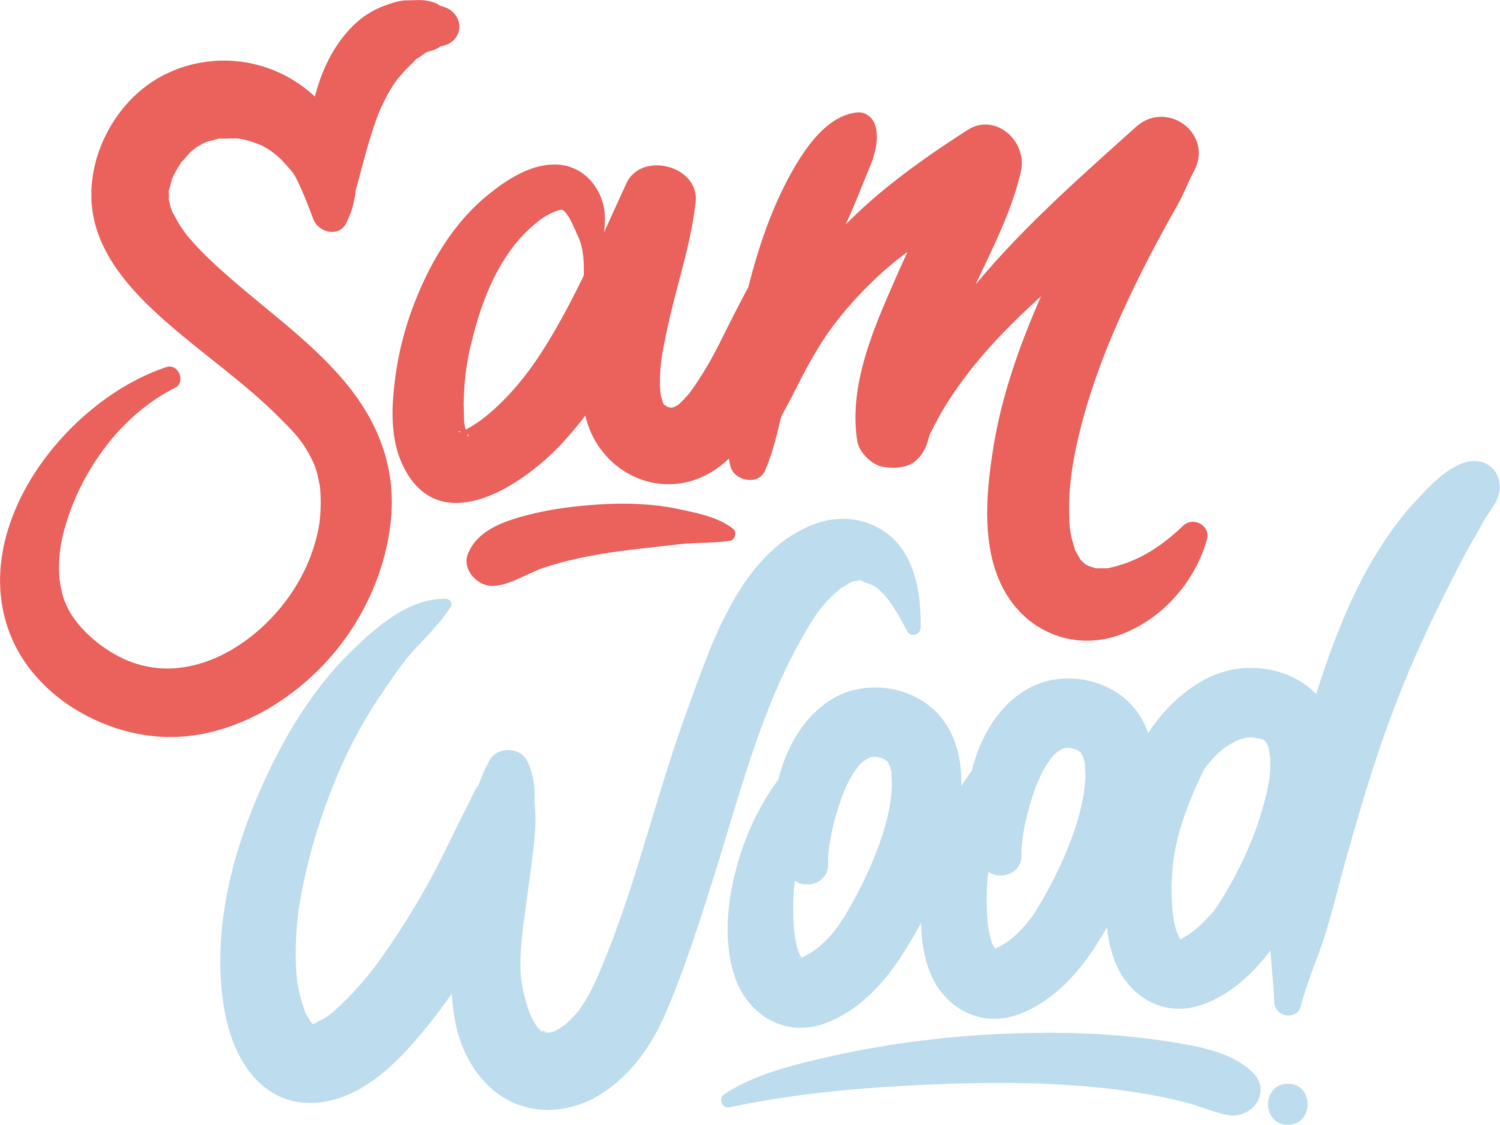 Design sam wood. Wednesday clipart tacky day